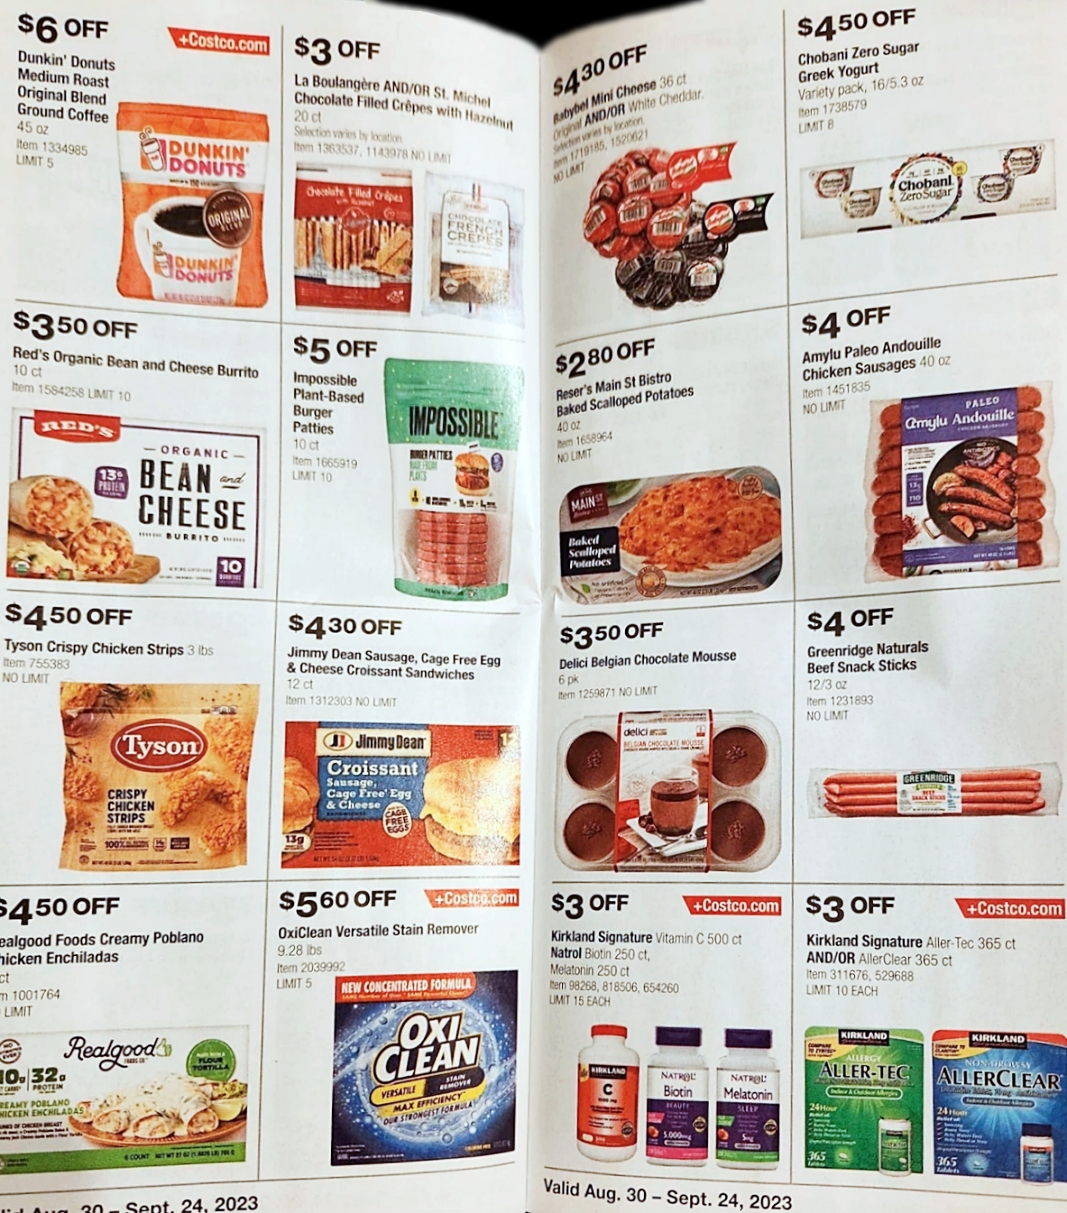 Costco Coupon Book SEPTEMBER 2023 | P 20 and 21